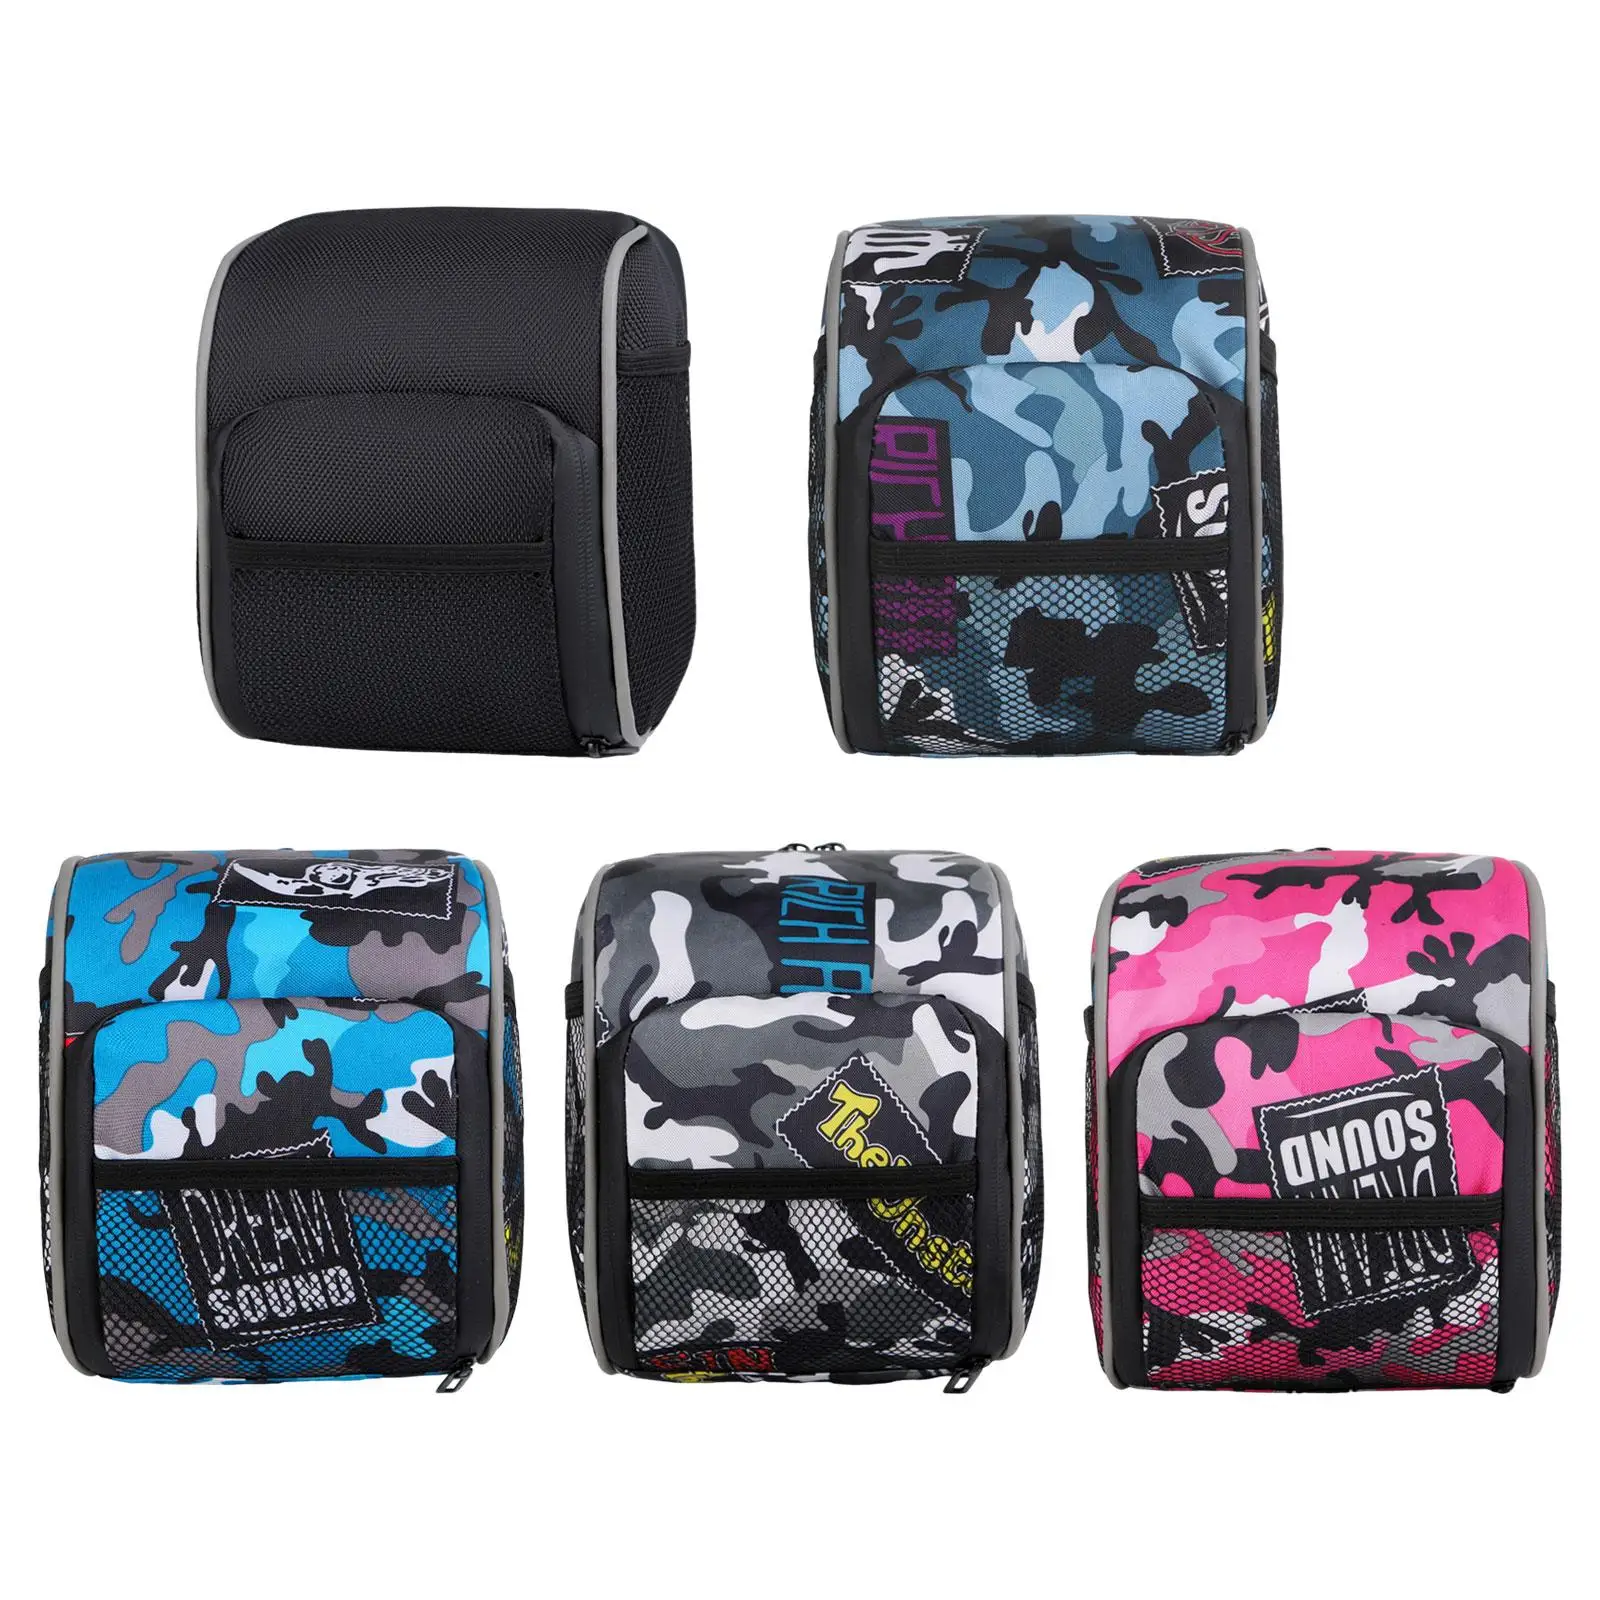 Bicycle Front Bag Bicycle Handlebar Bag Storage Bag for Riding Electric Bicycles Tricycles Road Mountain Bike Motorcycles